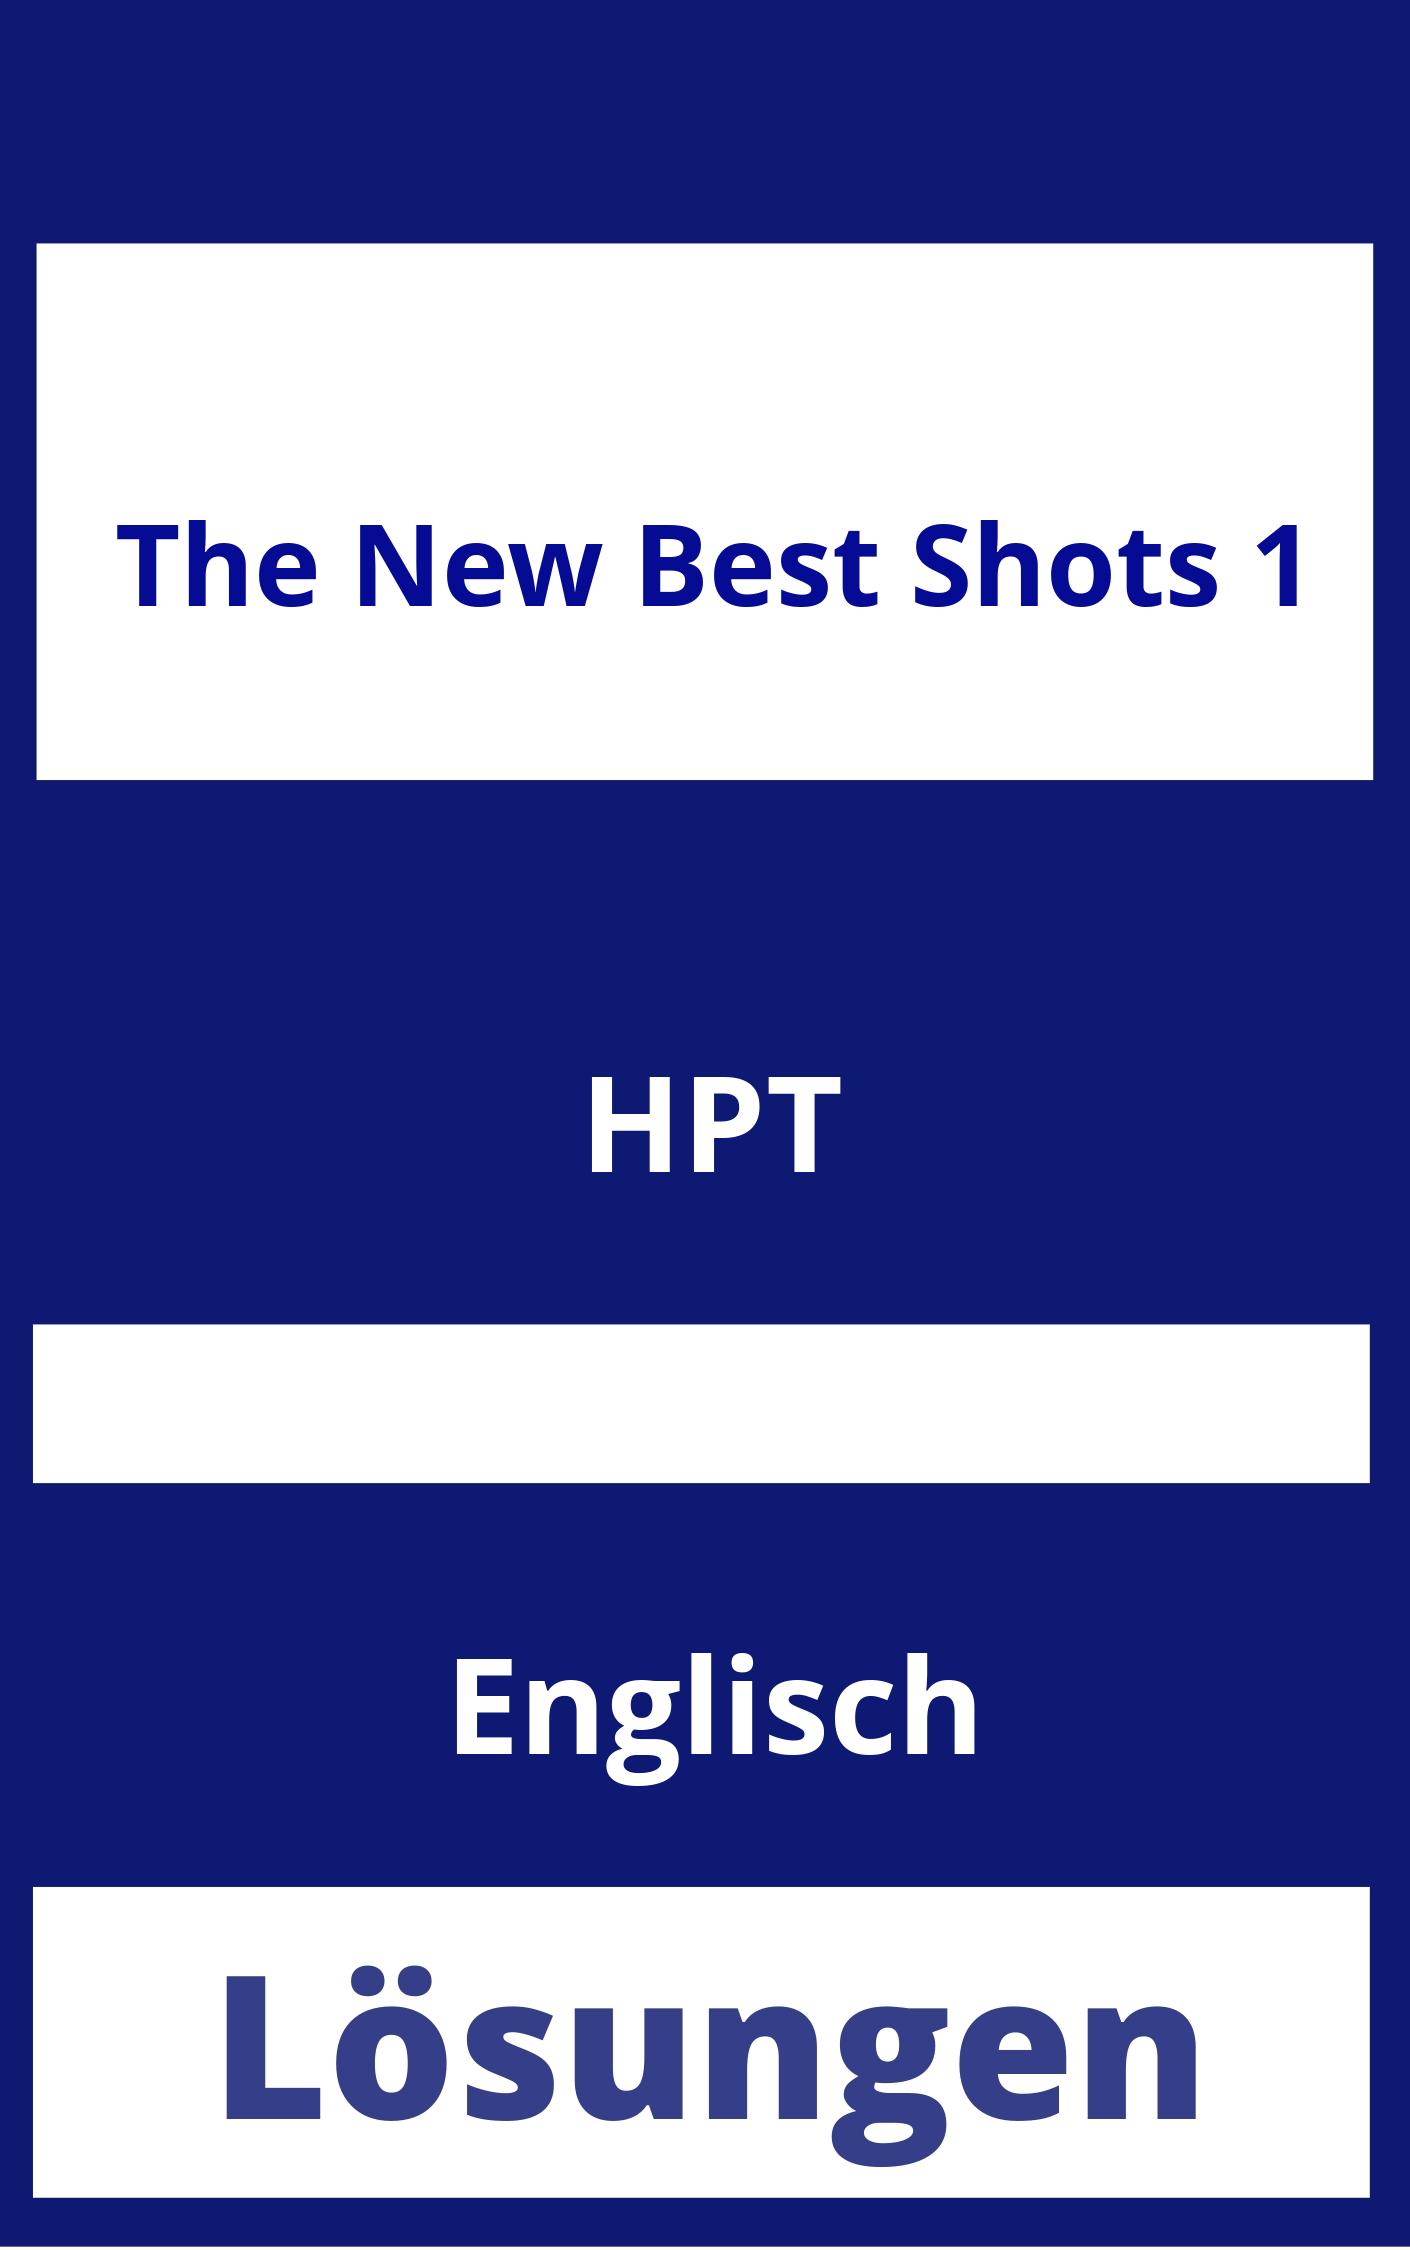 The New Best Shots 1